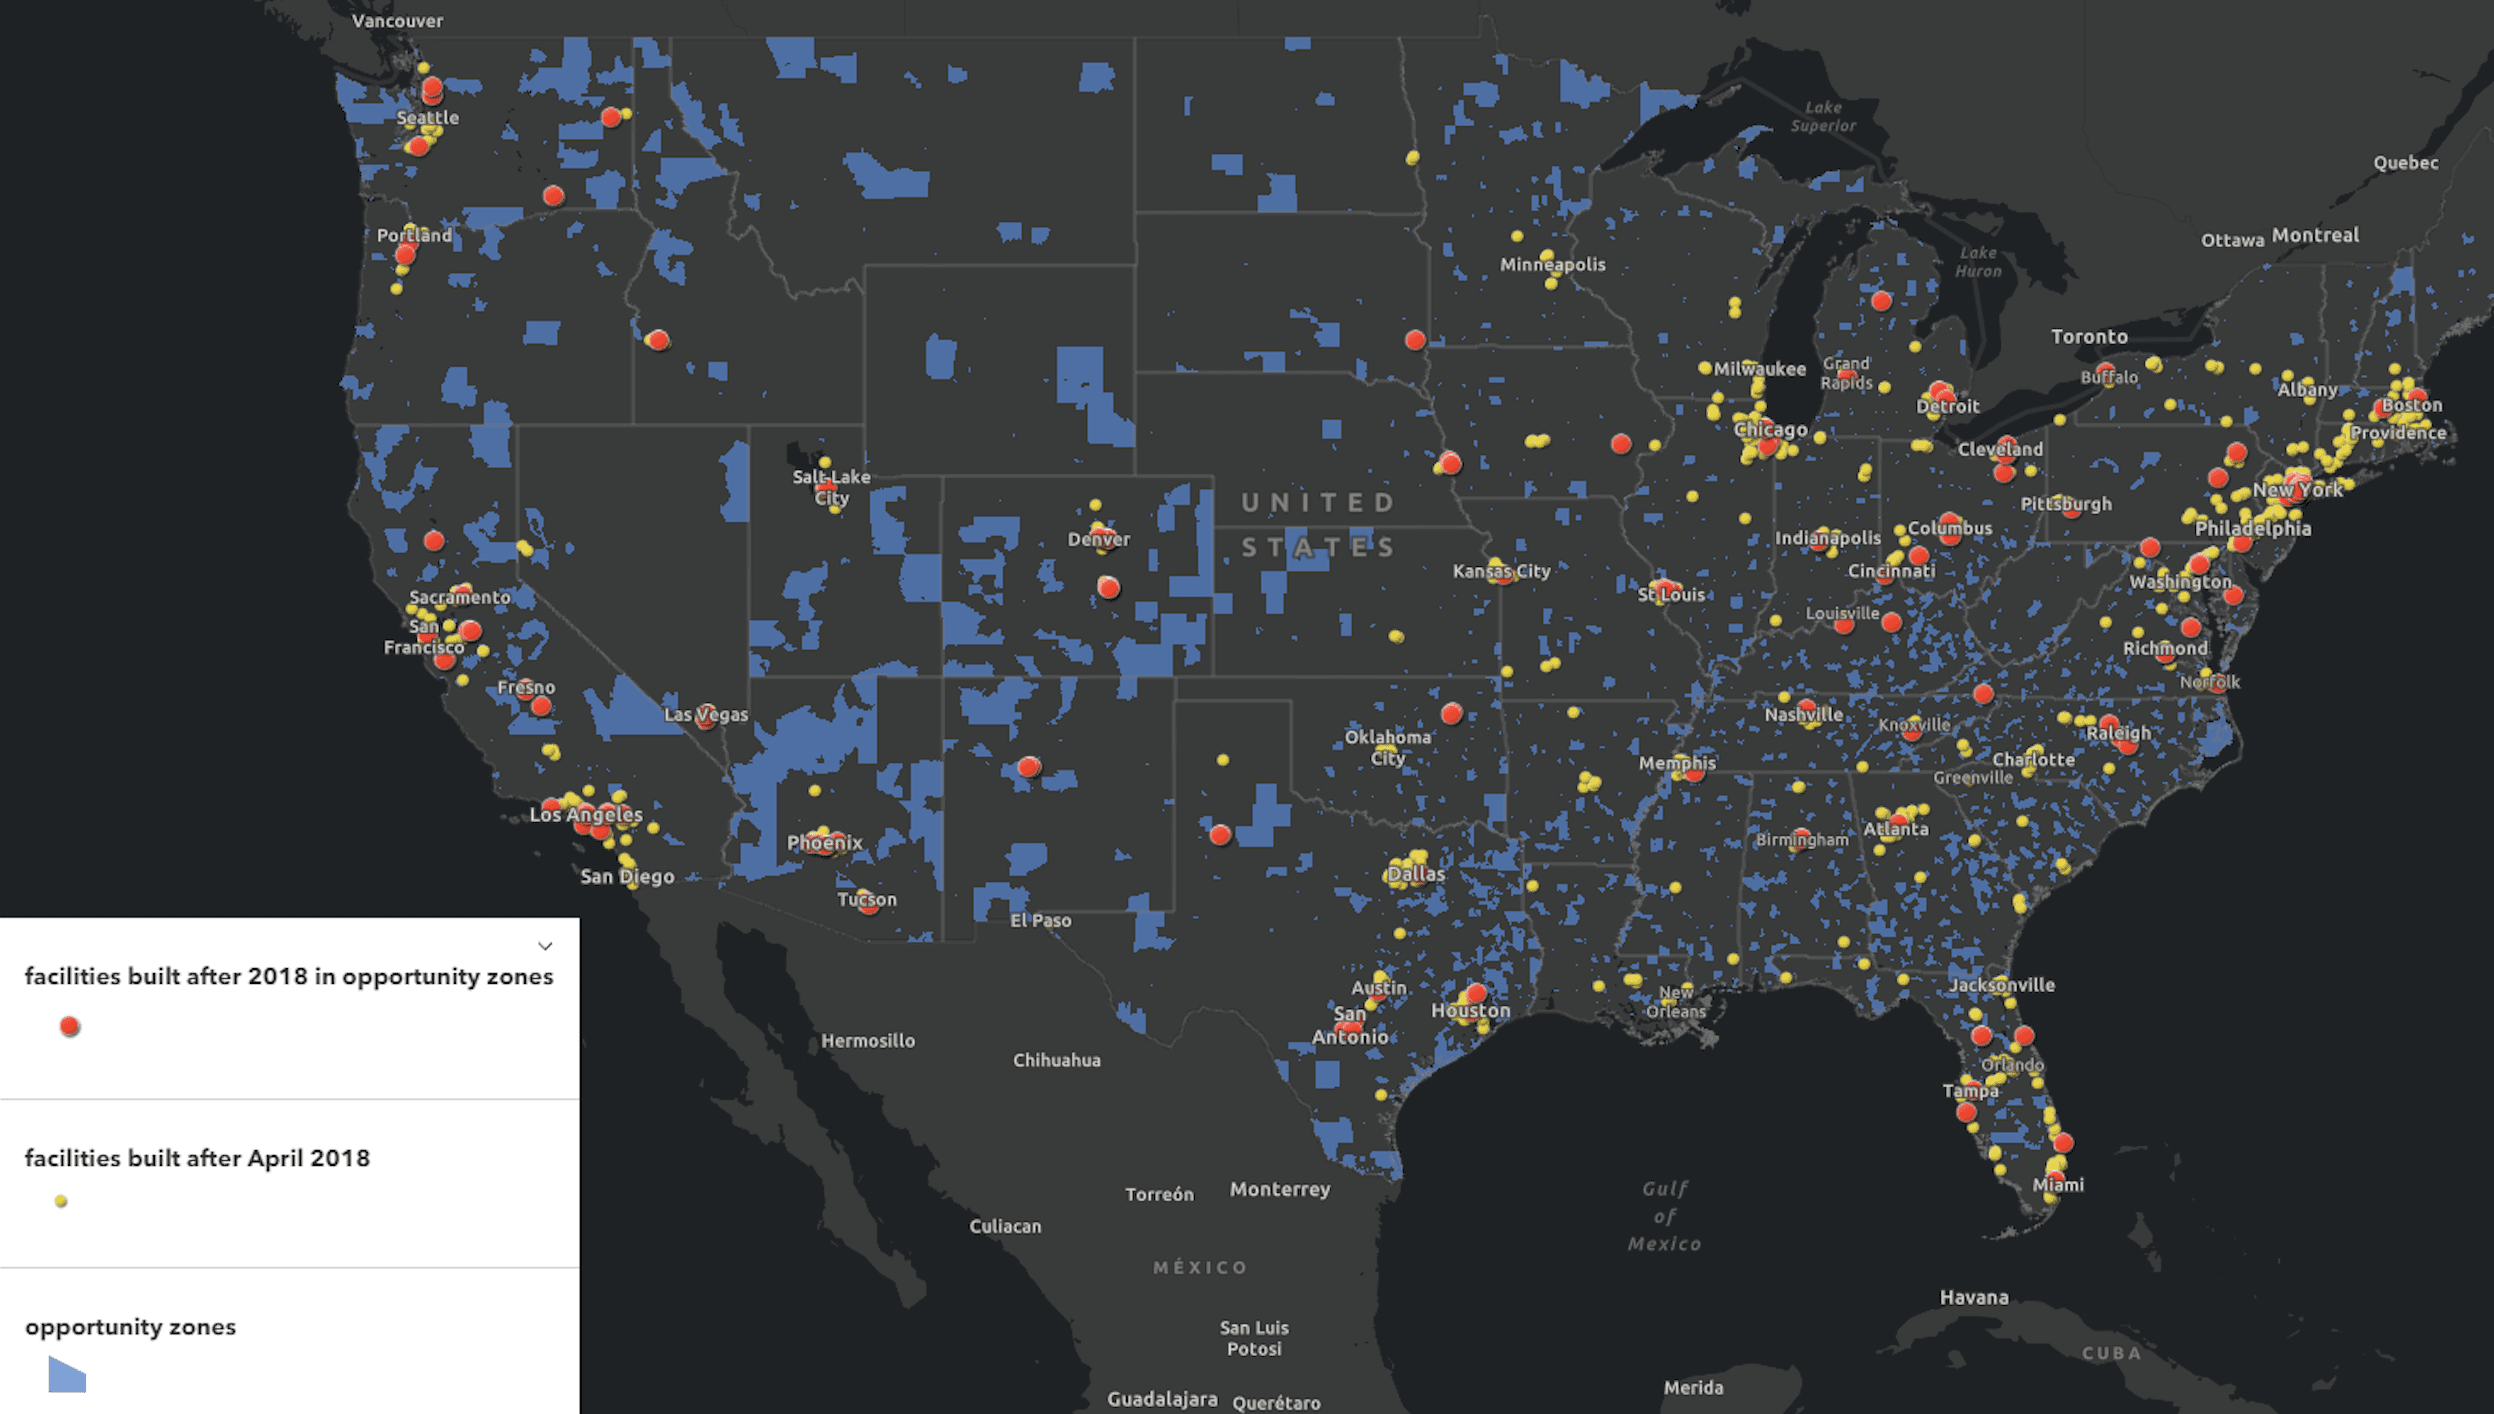 Map of the U.S. shows blue squares where Opportunity Zones are located, and blue and yellow dots for Amazon warehouses.